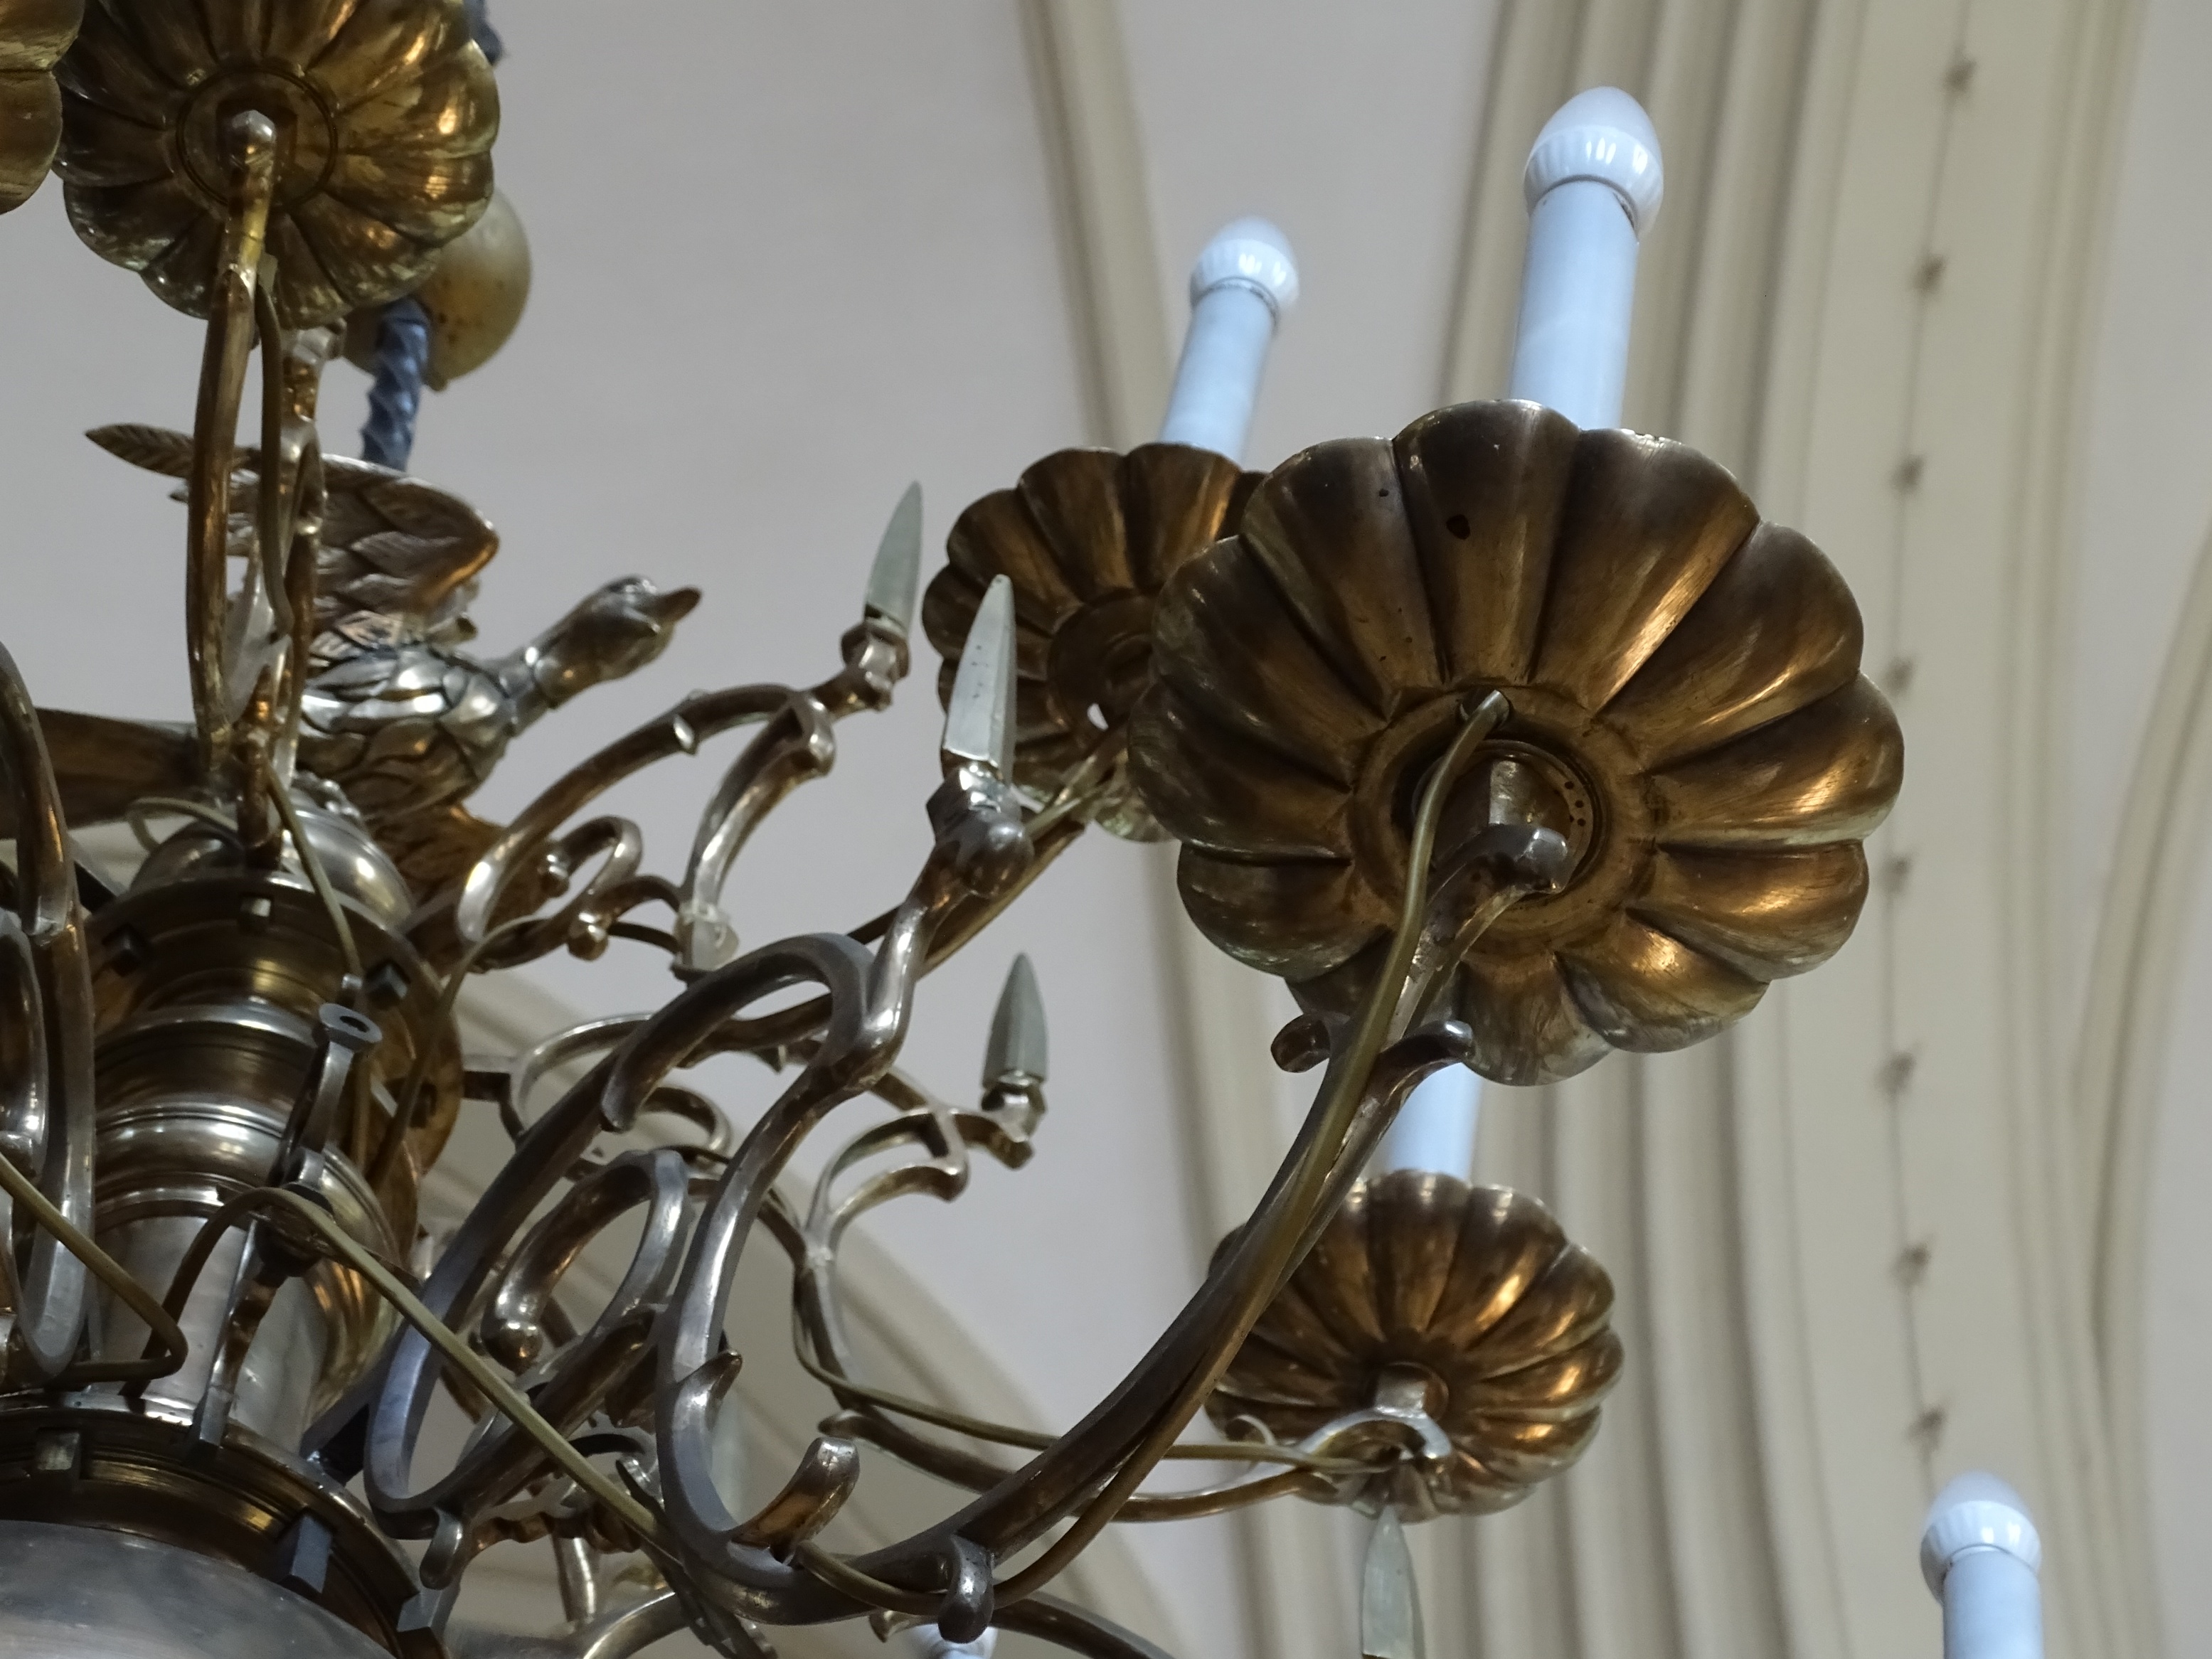 Fragment of the chandelier, 2nd half of 17th c., Liepāja St. Anne’s Evangelical Lutheran Church. Photo by Alantė Valtaitė-Gagač, 2021